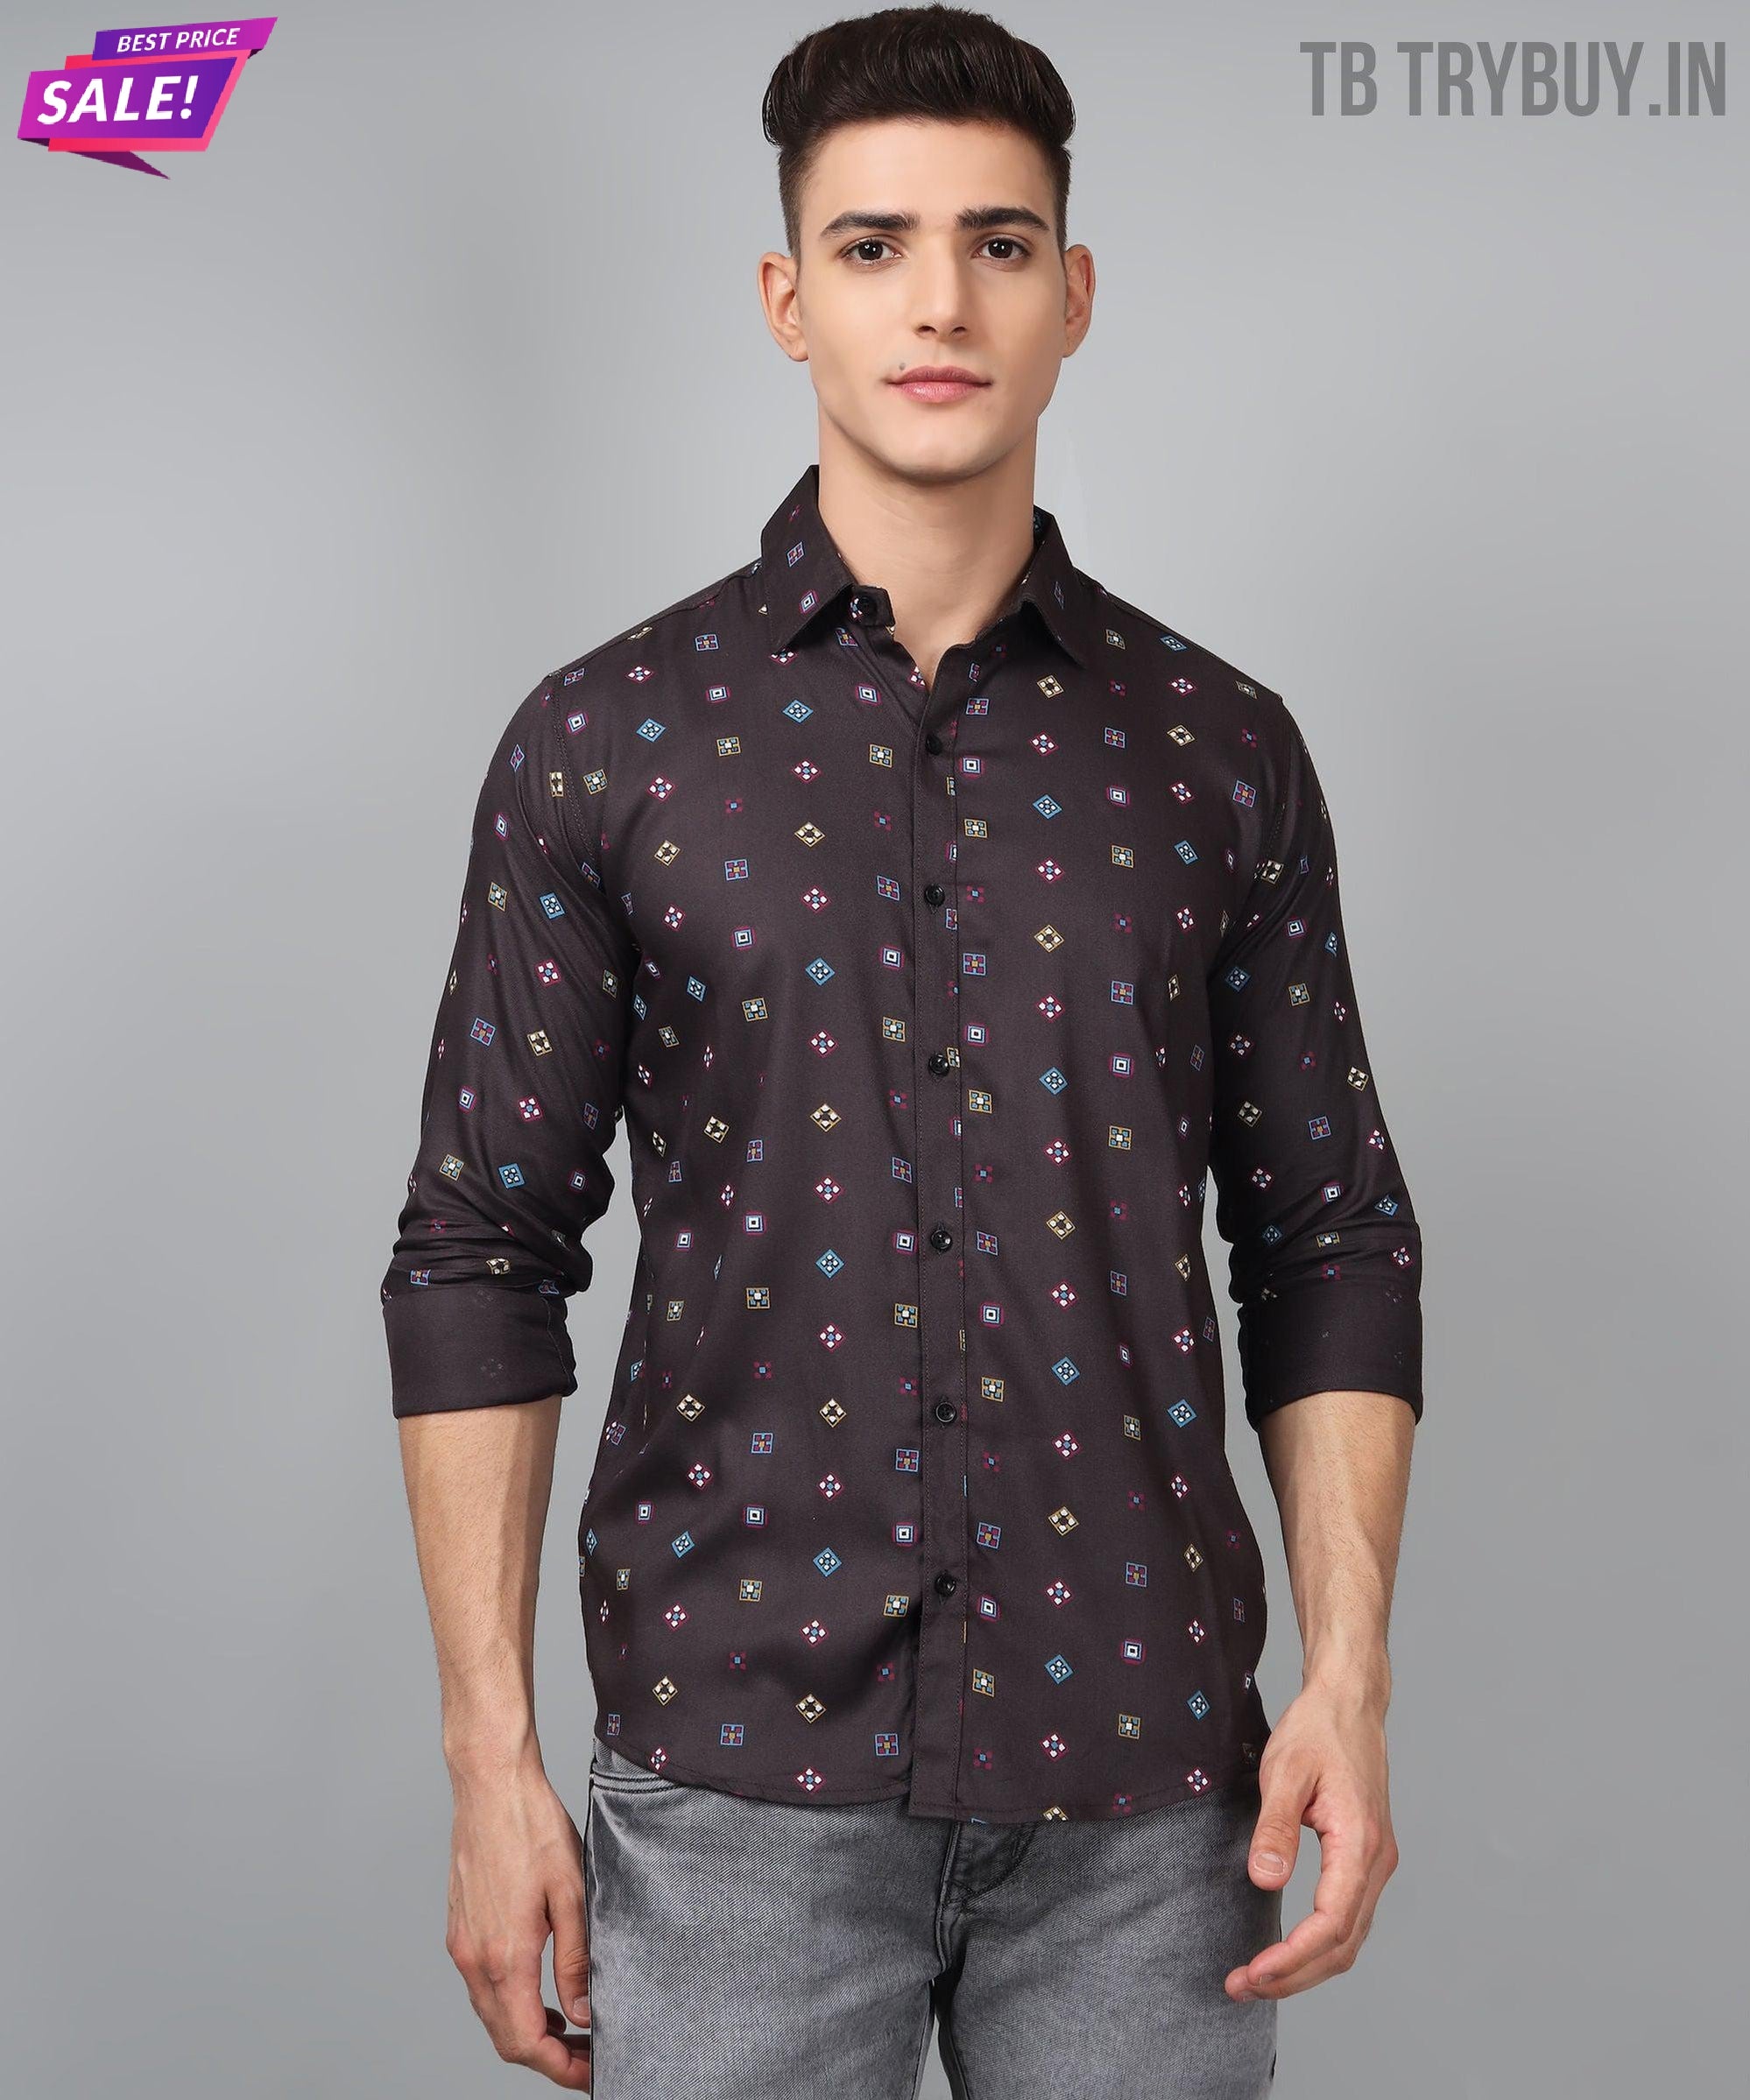 Fabulous Multi Colored Printed Cotton Casual Shirt for Men by Trybuy Premium